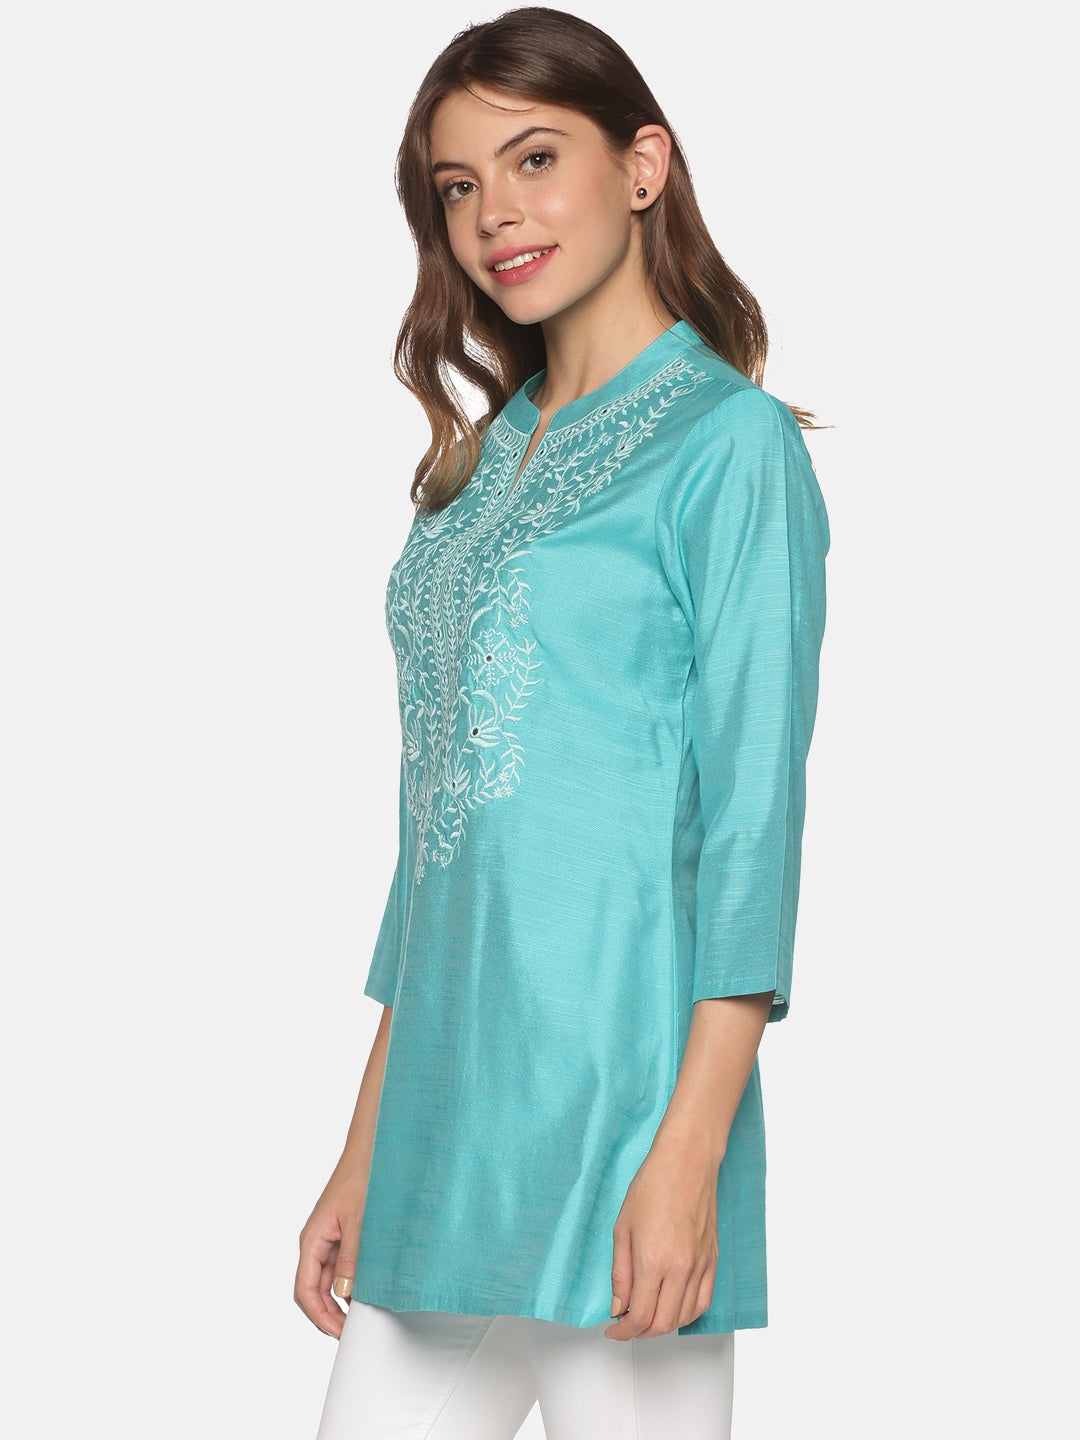 Turquoise Blue Art Raw Silk Tunic with Floral Embroidered Neck & Mirror Accents